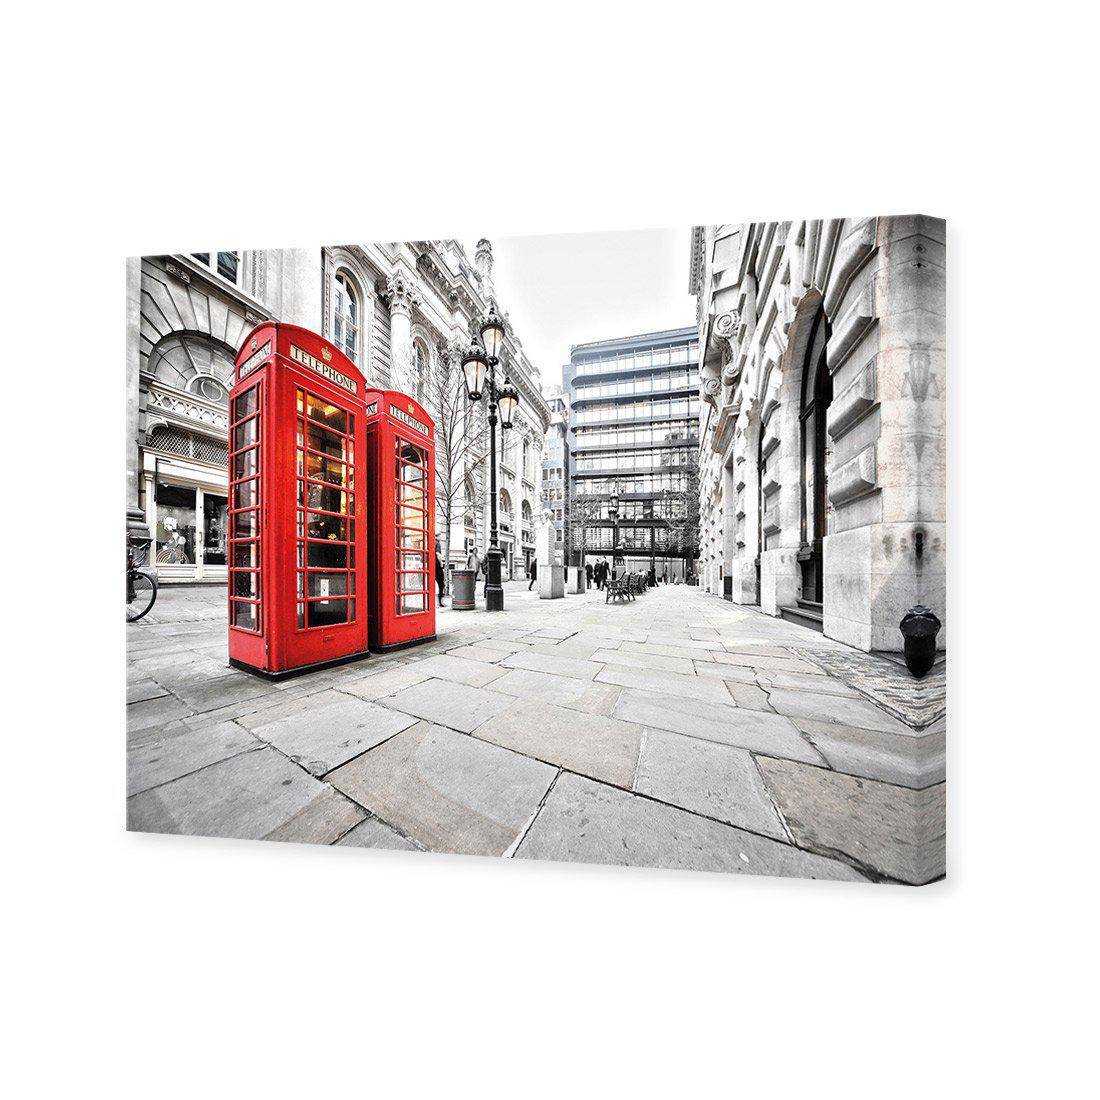 London Red Phone Booths Canvas Art-Canvas-Wall Art Designs-45x30cm-Canvas - No Frame-Wall Art Designs